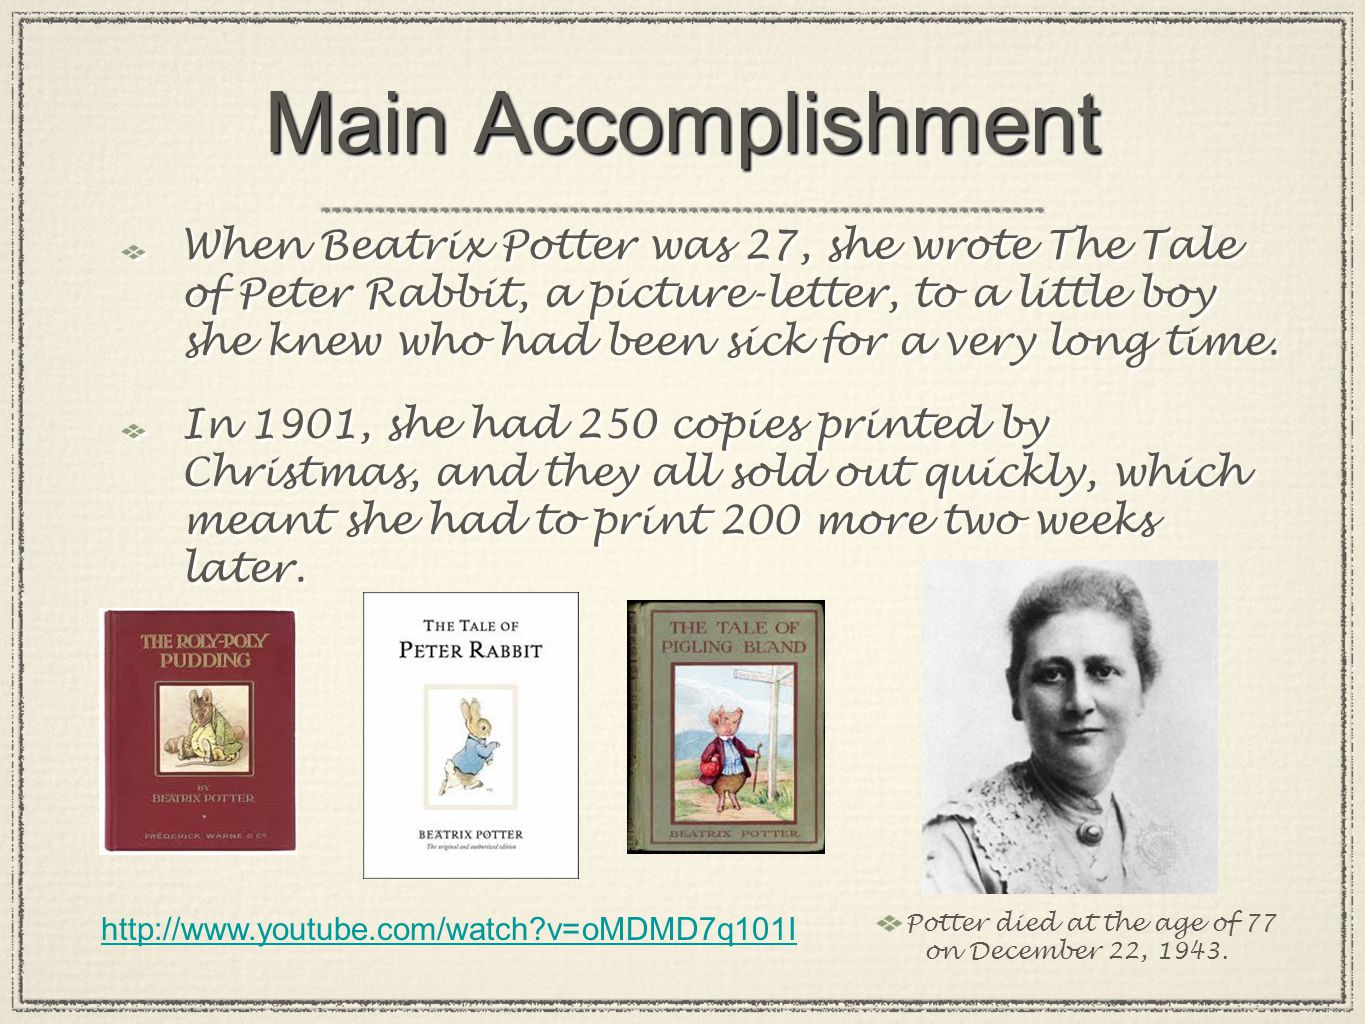 Main Accomplishment When Beatrix Potter was 27, she wrote The Tale of Peter Rabbit, a picture-letter, to a little boy she knew who had been sick for a very long time.